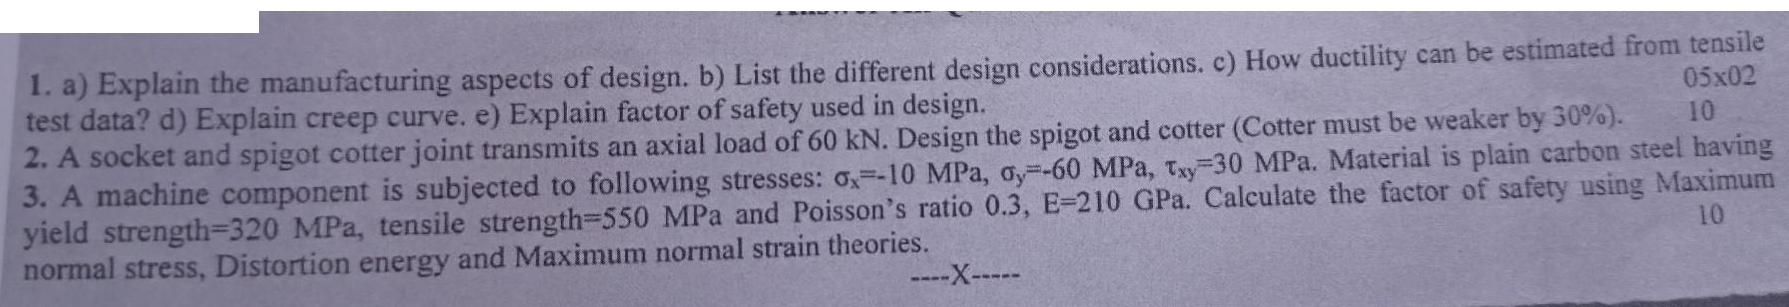 1. a) Explain the manufacturing aspects of design. b) List the different design considerations. c) How